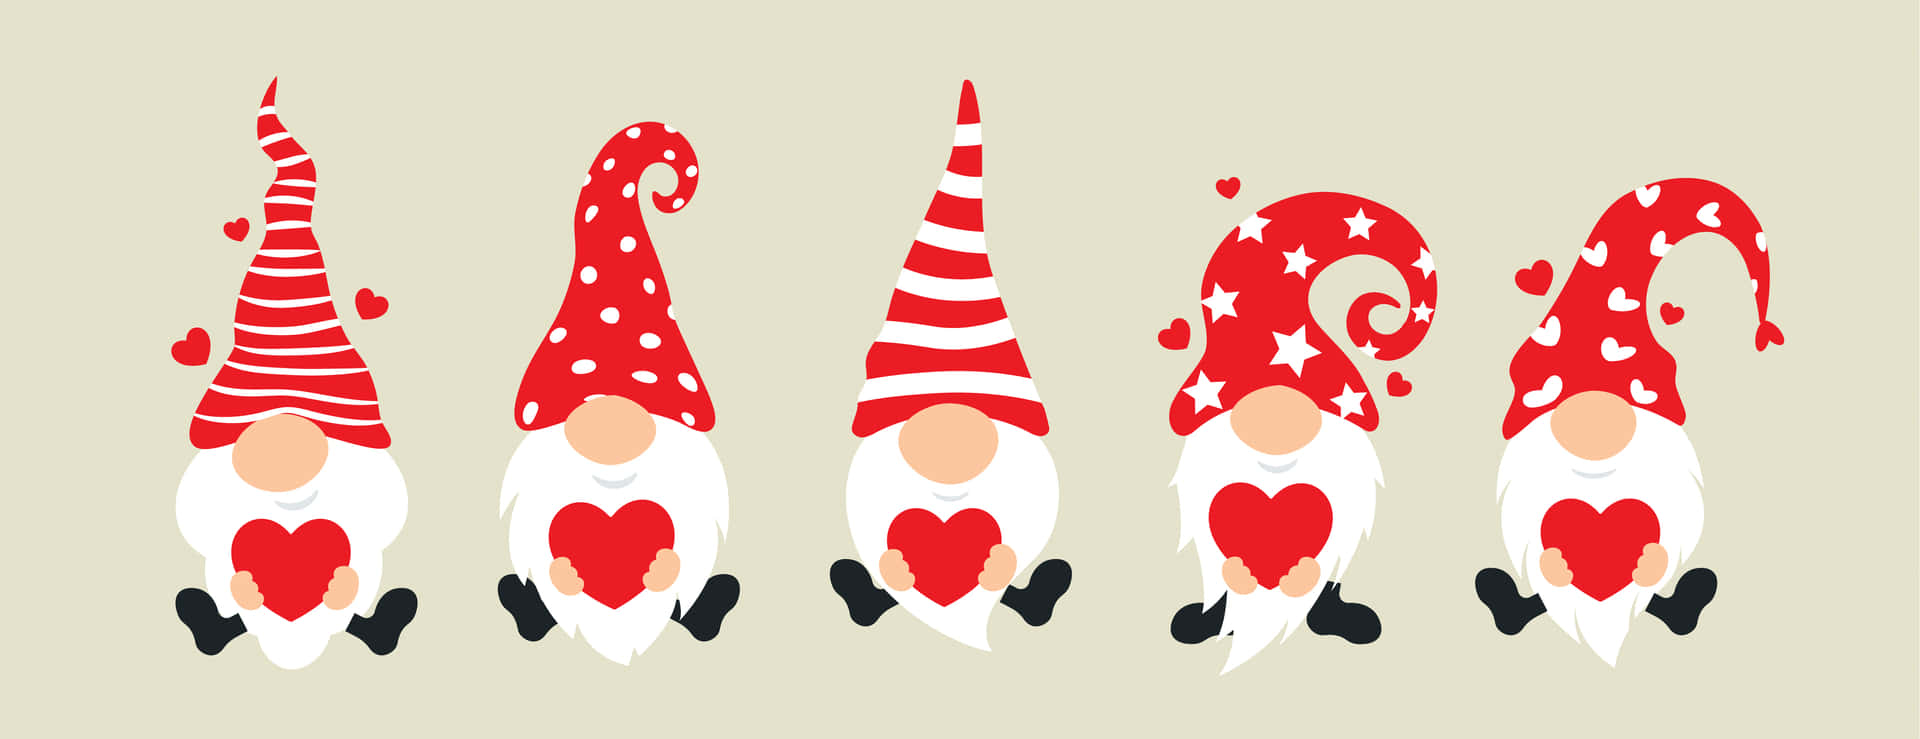 Valentine Gnome Vector Images over 960